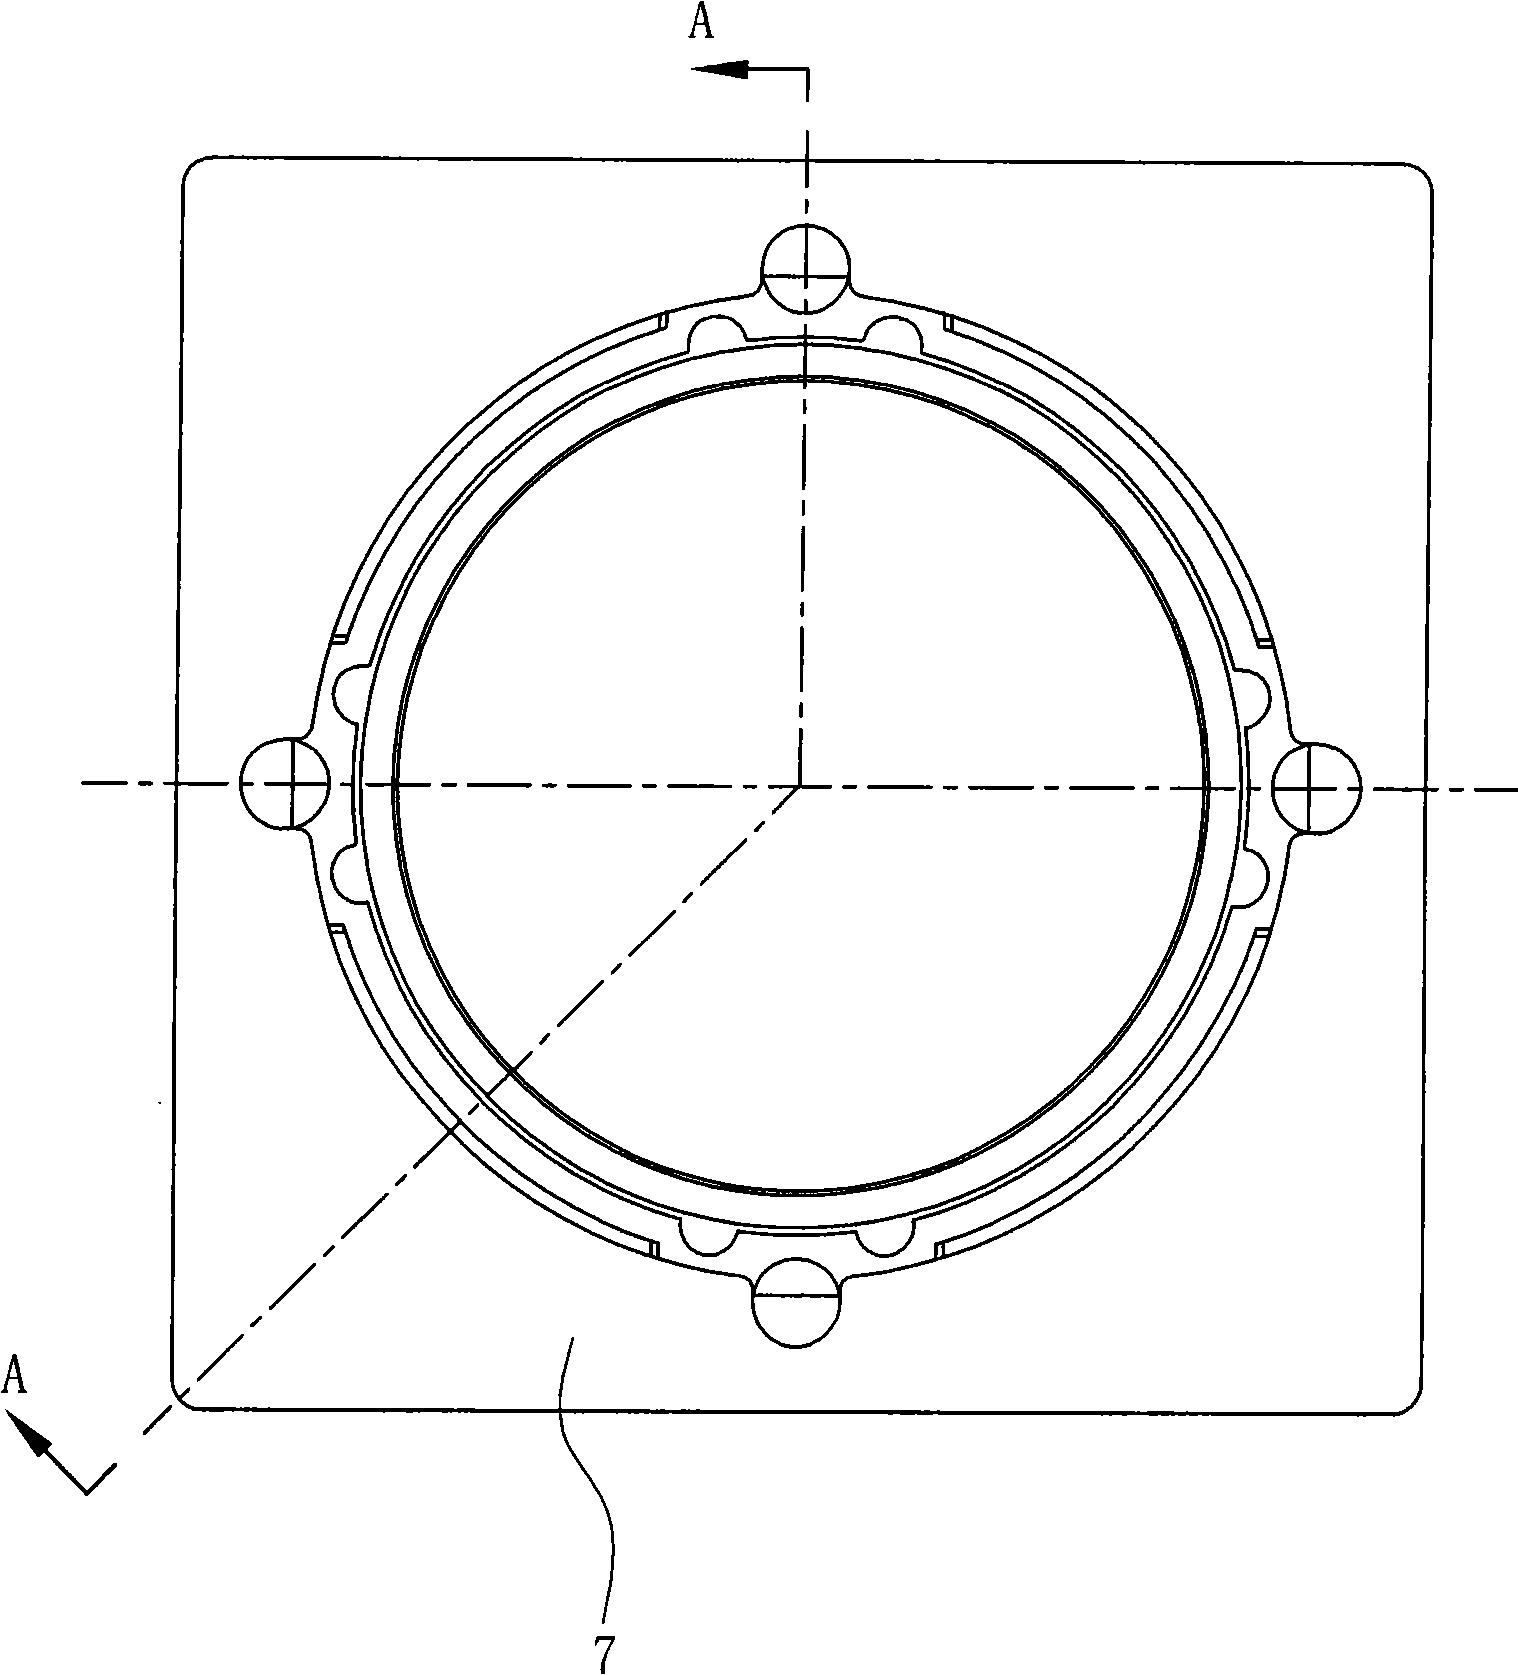 Reed for driving mechanism of camera lens